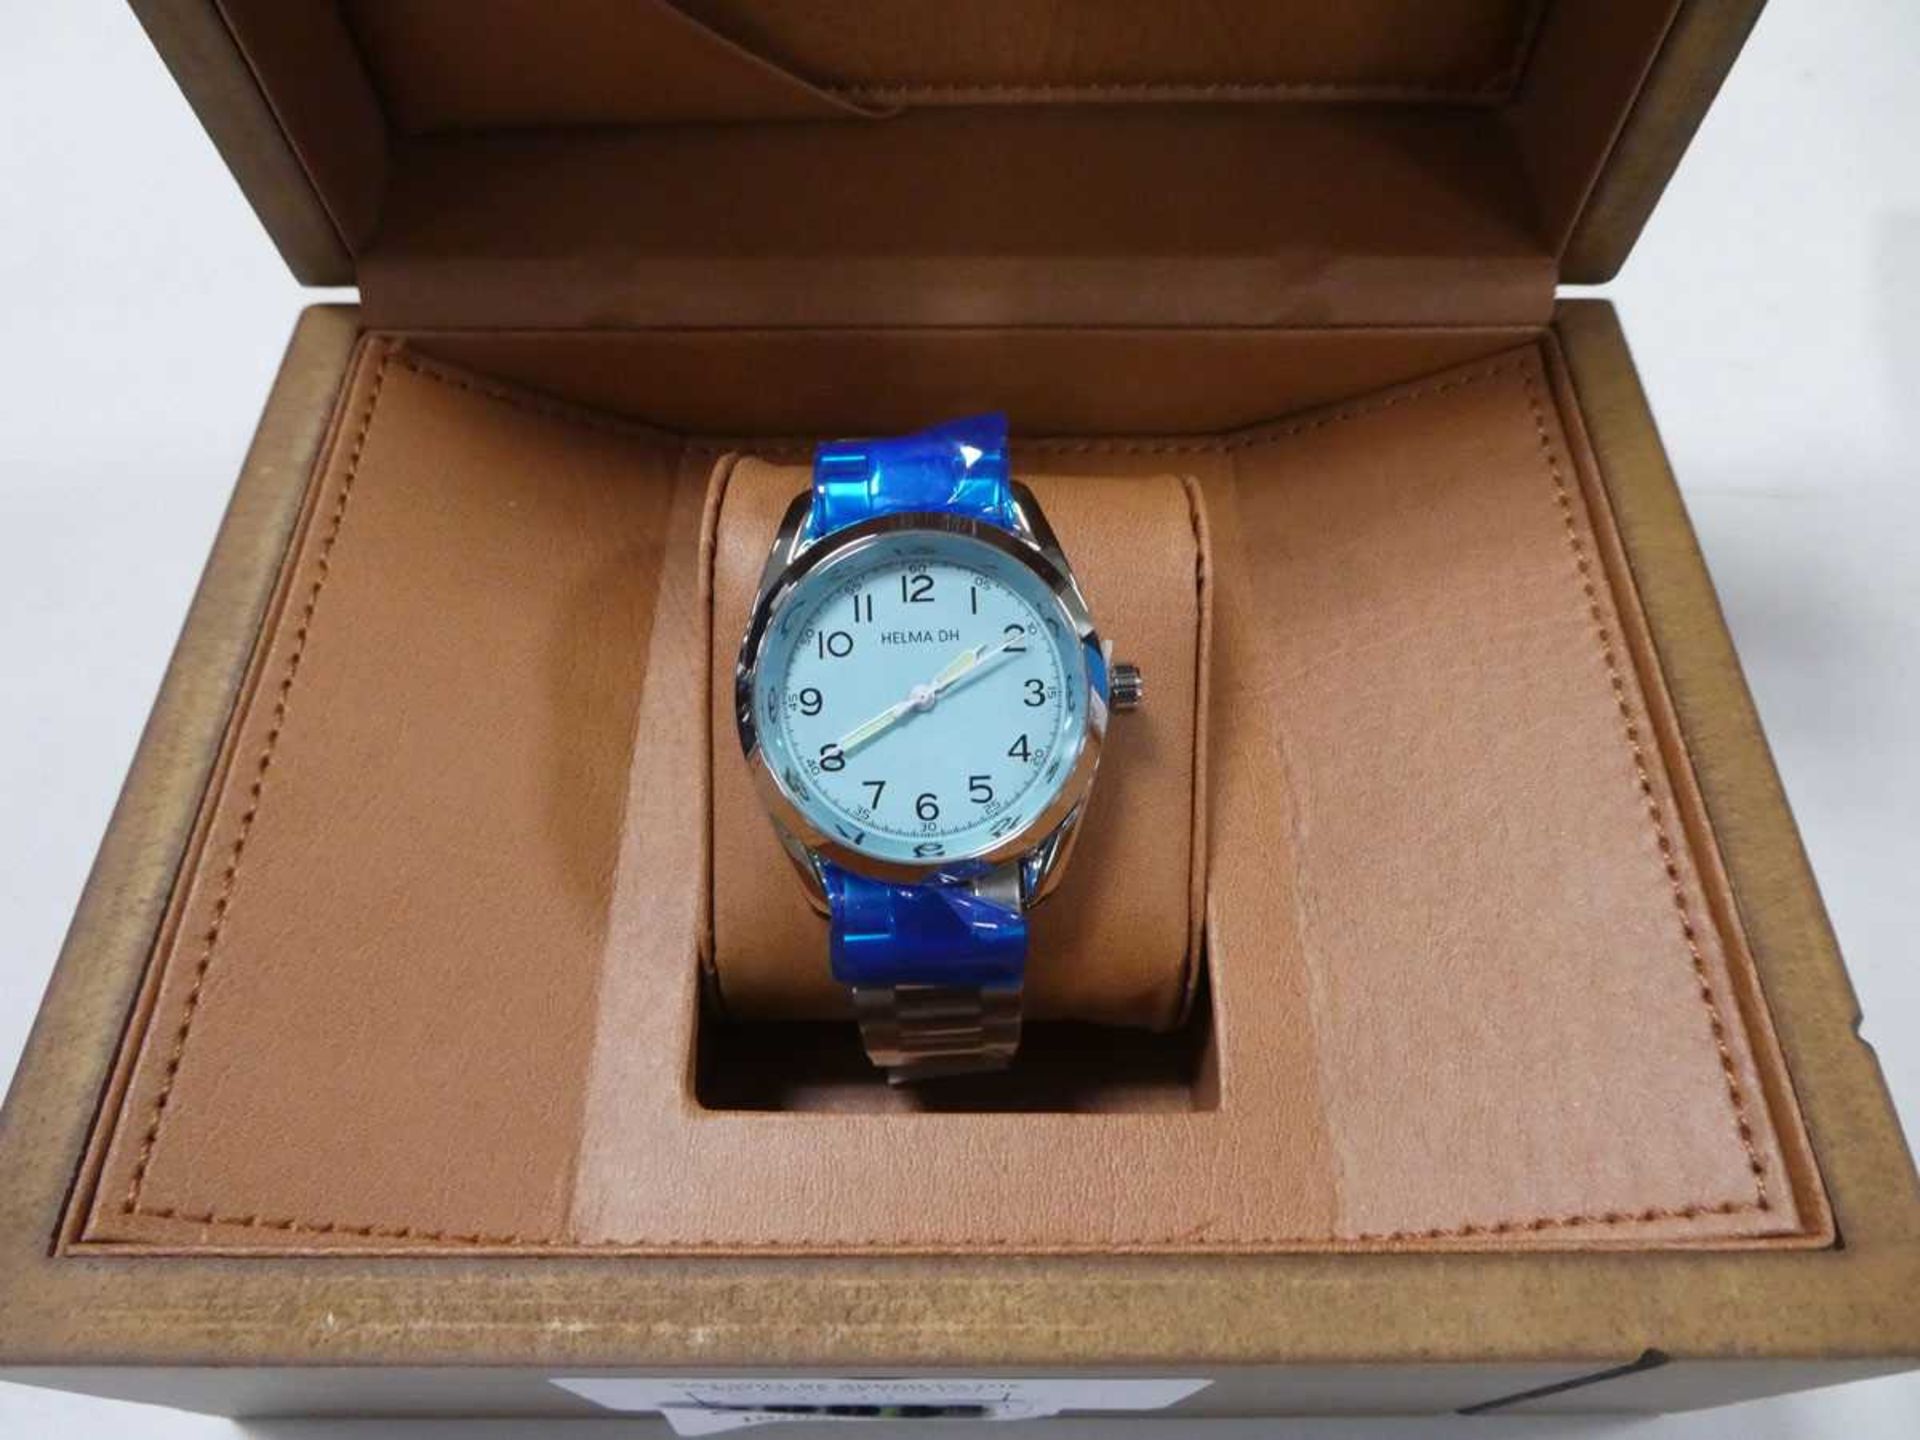 +VAT Boxed Helma DH men's wristwatch with blue face and steel strap - Image 2 of 2